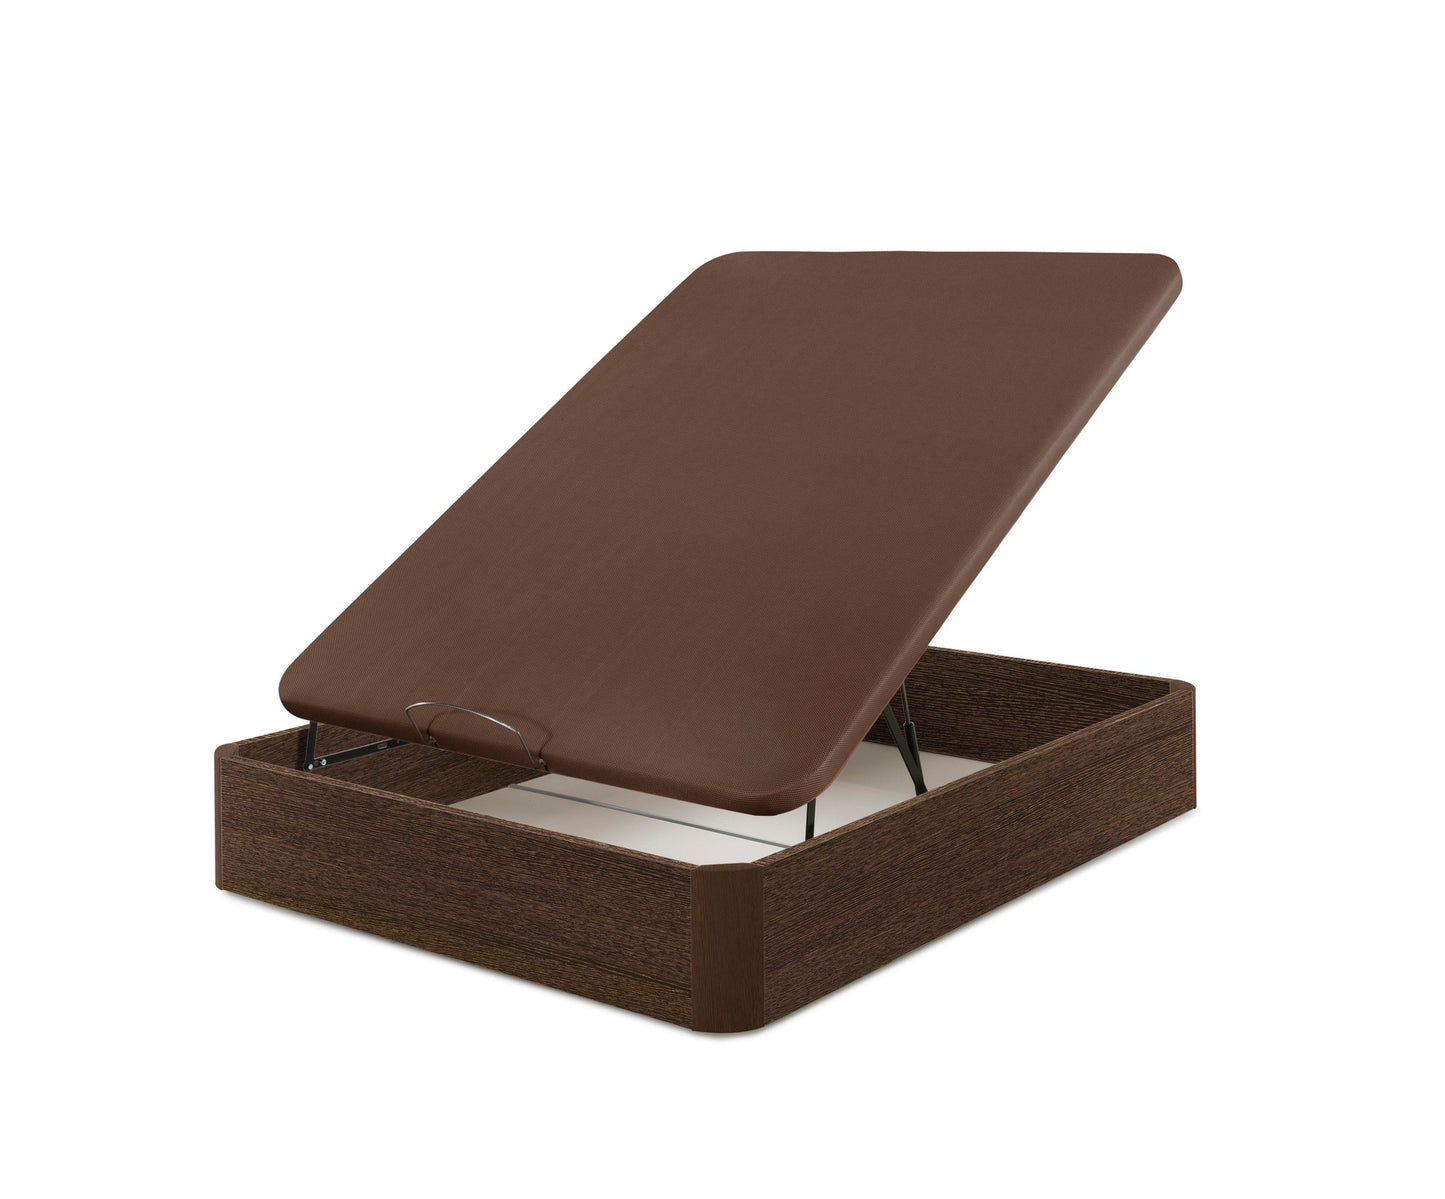 Generation Z Wooden Canapé and Mattress Pack | WENGUE